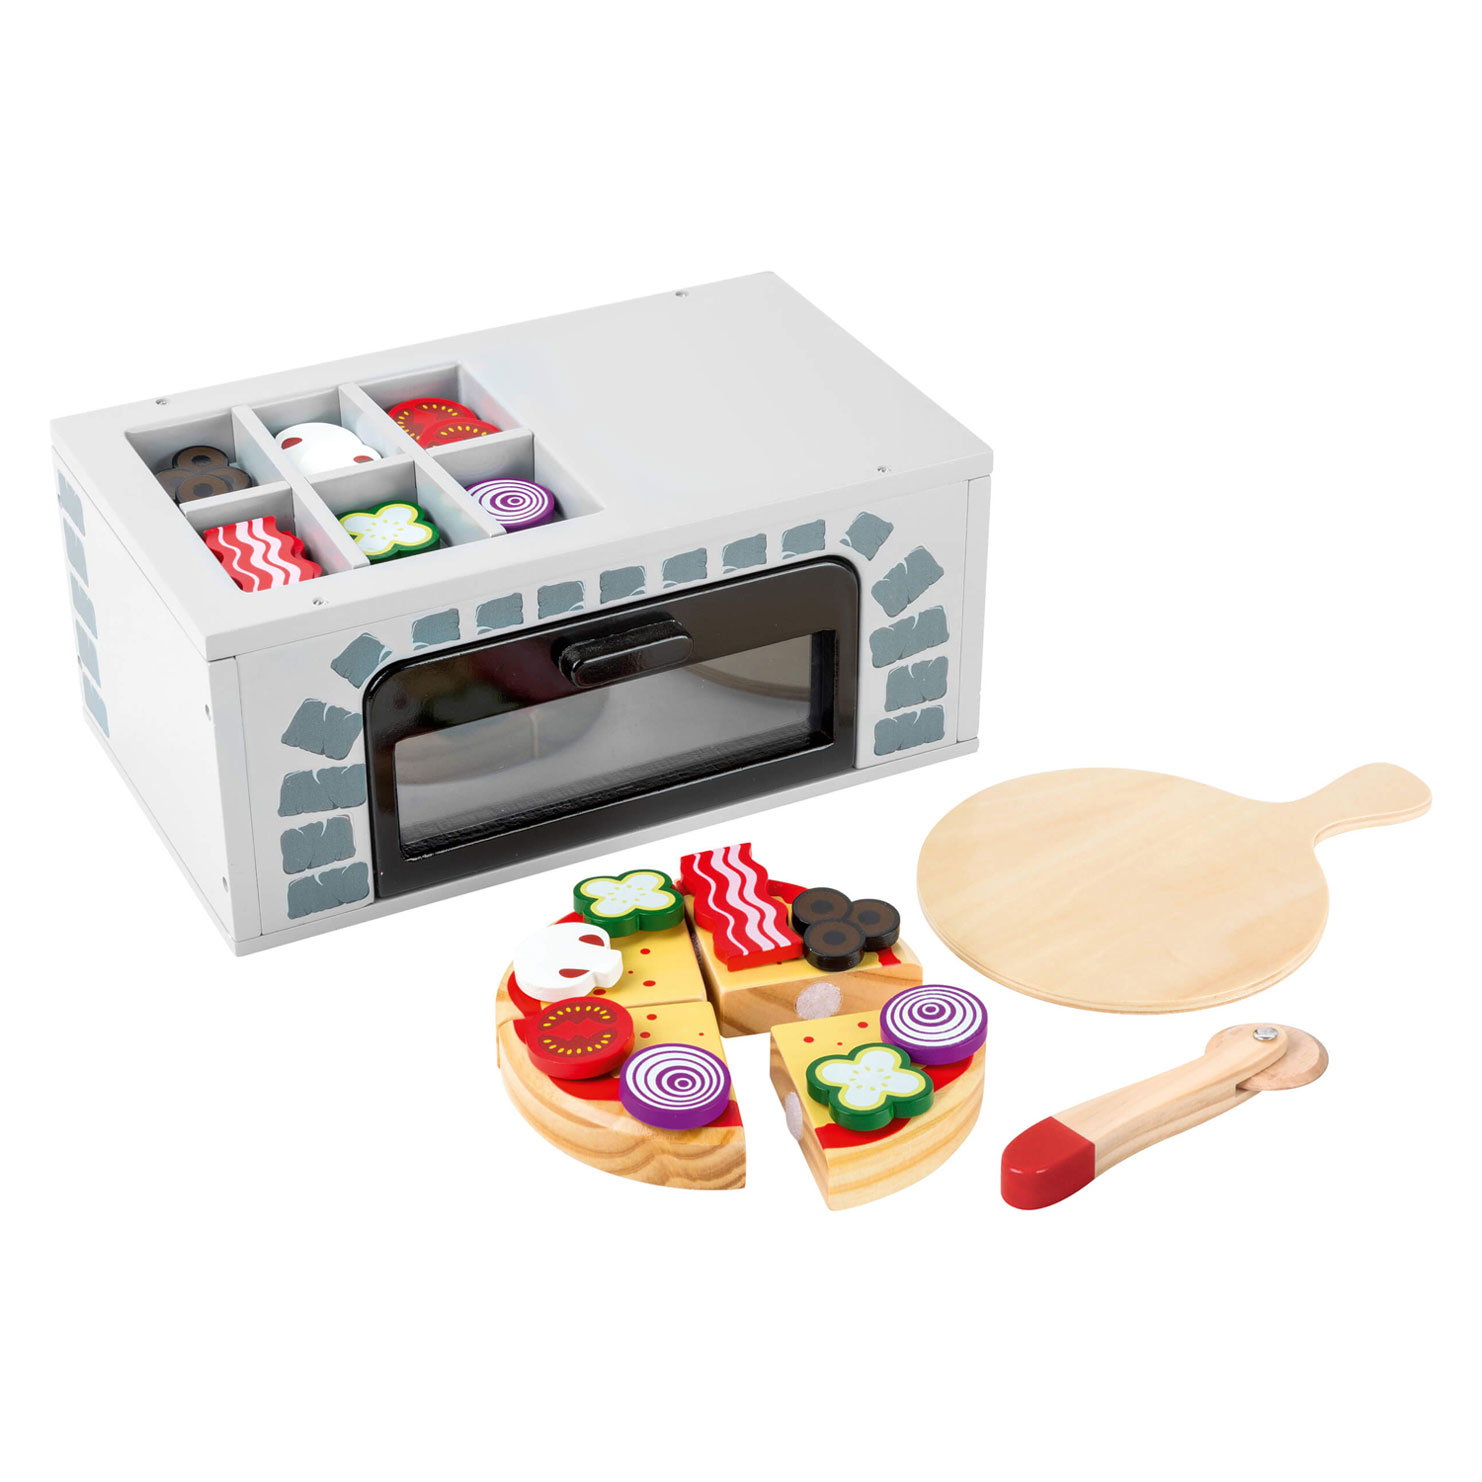 Small Foot - Play Food Pizzaofen-Set aus Holz, 25 dlg.